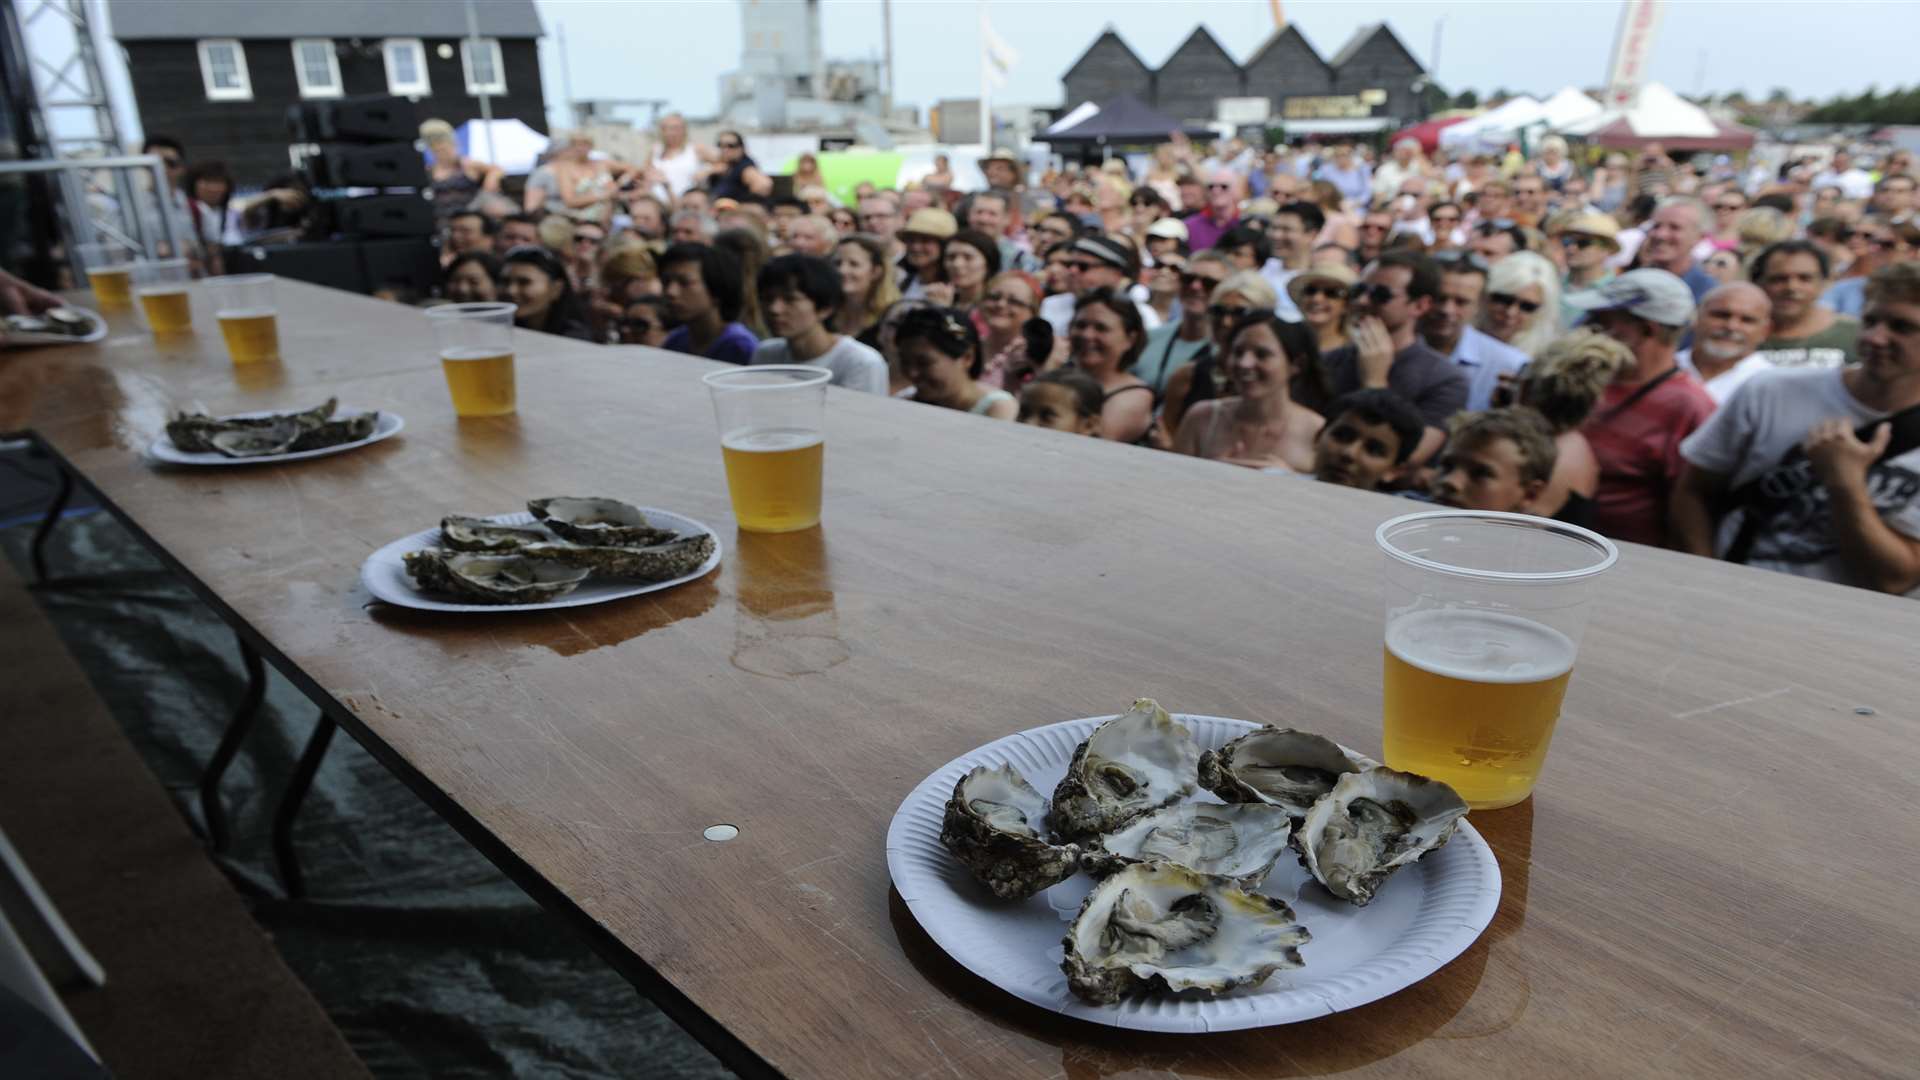 The town's Oyster Festival attracts thousands of visitors every year